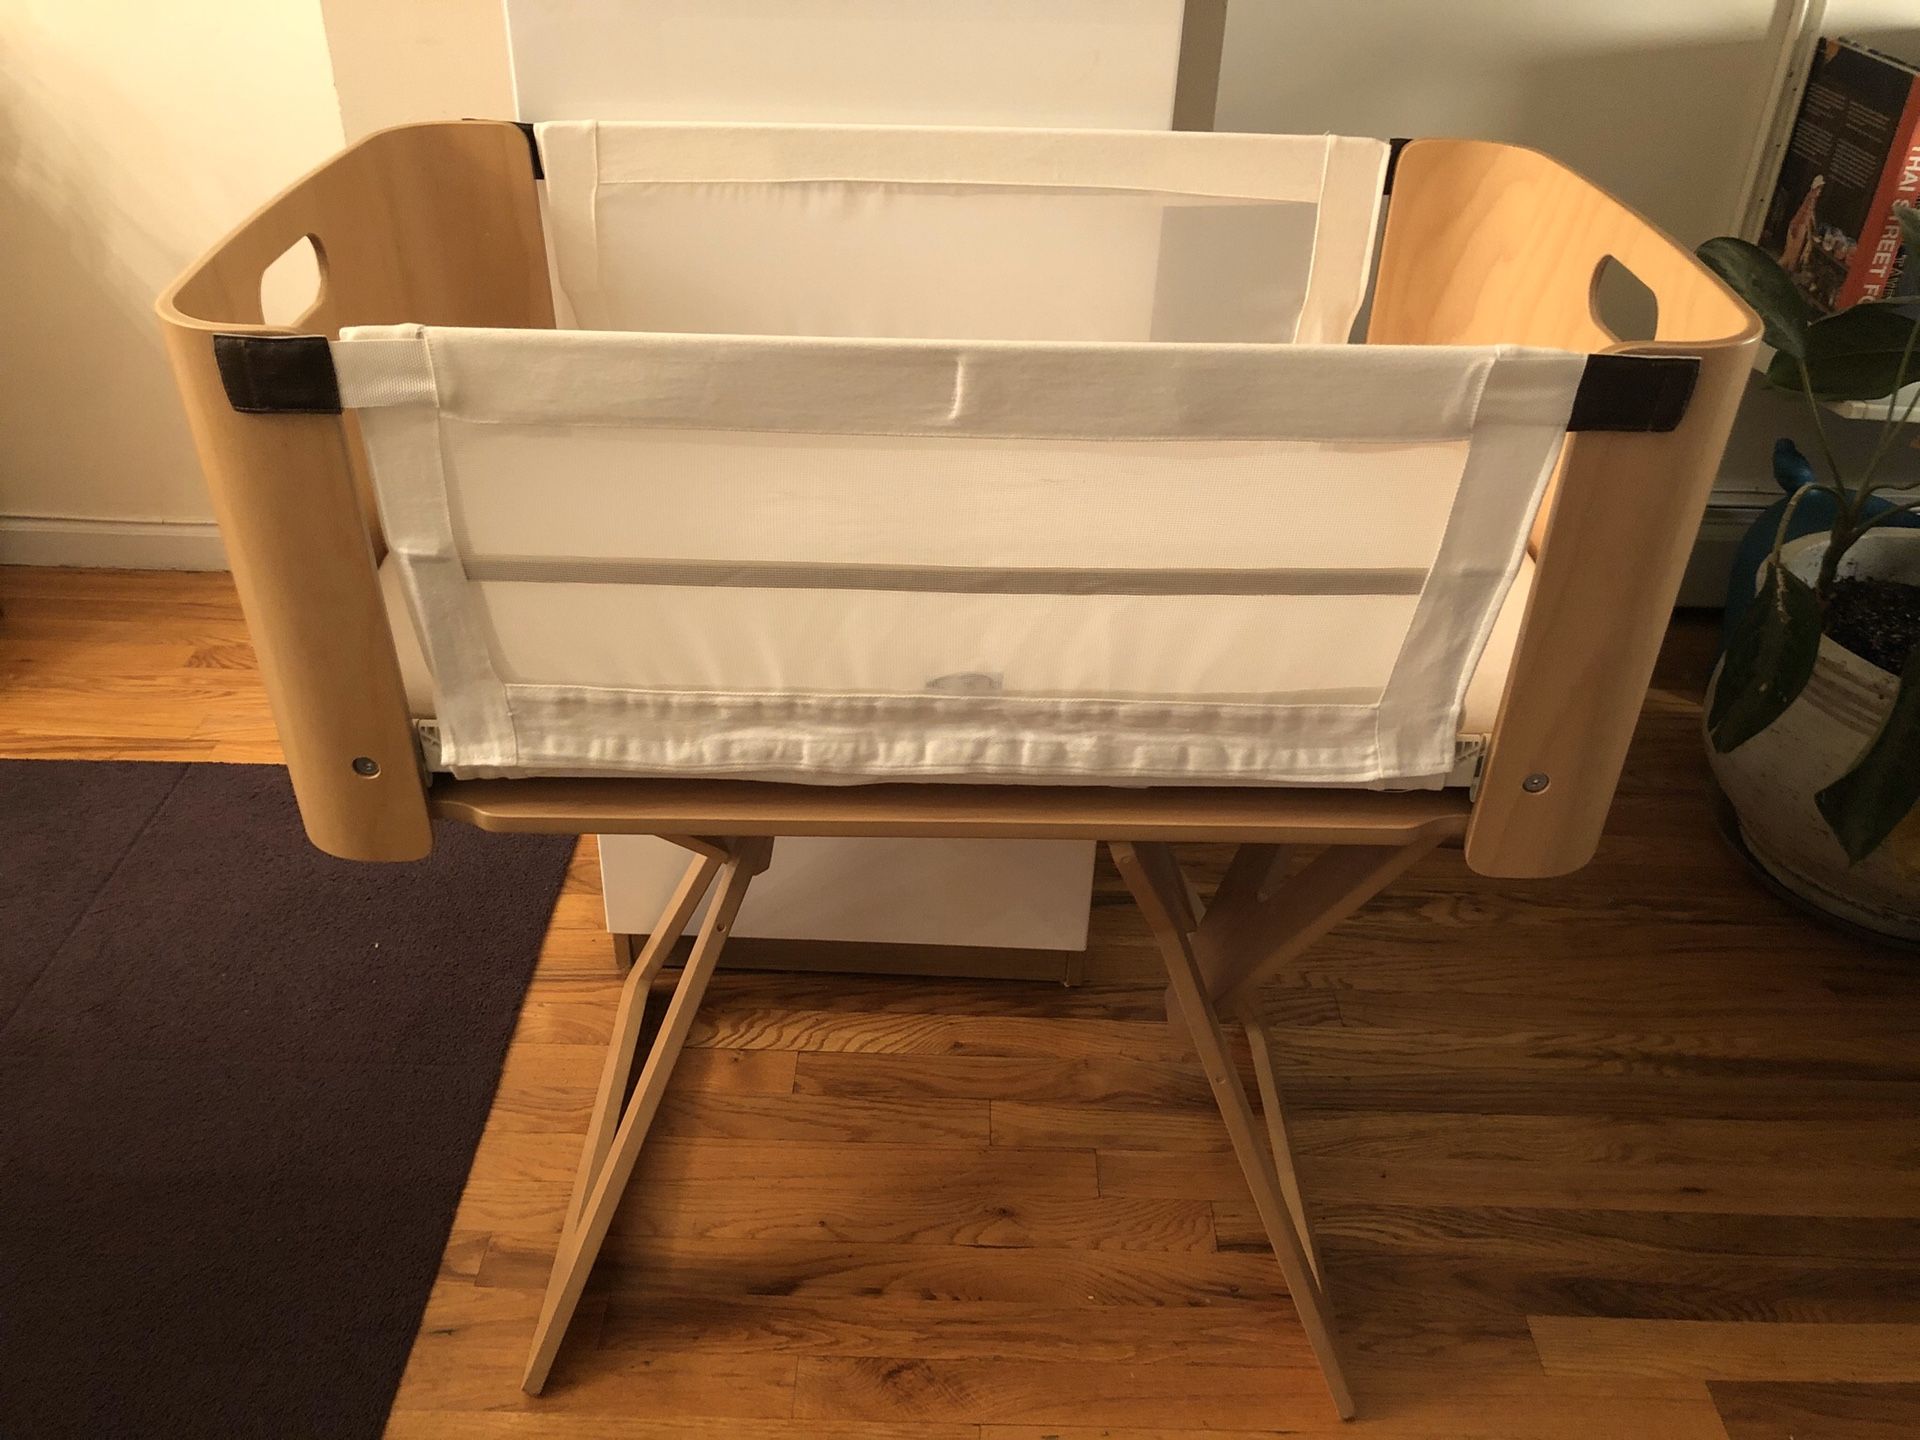 BEDNEST Baby Bedside Crib Bassinet - Great Condition!